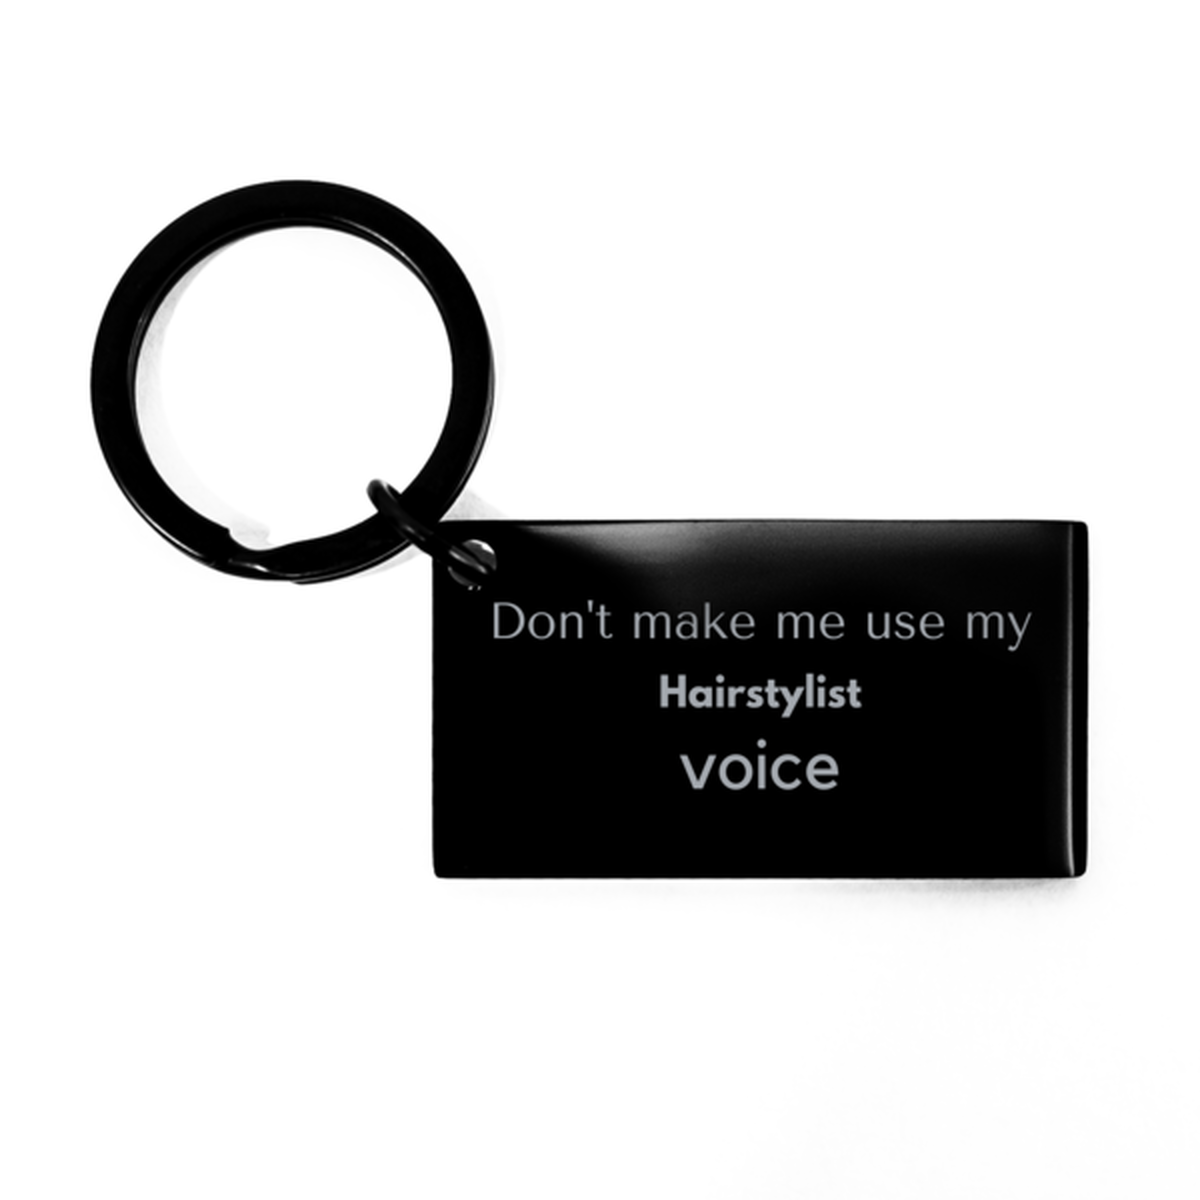 Don't make me use my Hairstylist voice, Sarcasm Hairstylist Gifts, Christmas Hairstylist Keychain Birthday Unique Gifts For Hairstylist Coworkers, Men, Women, Colleague, Friends